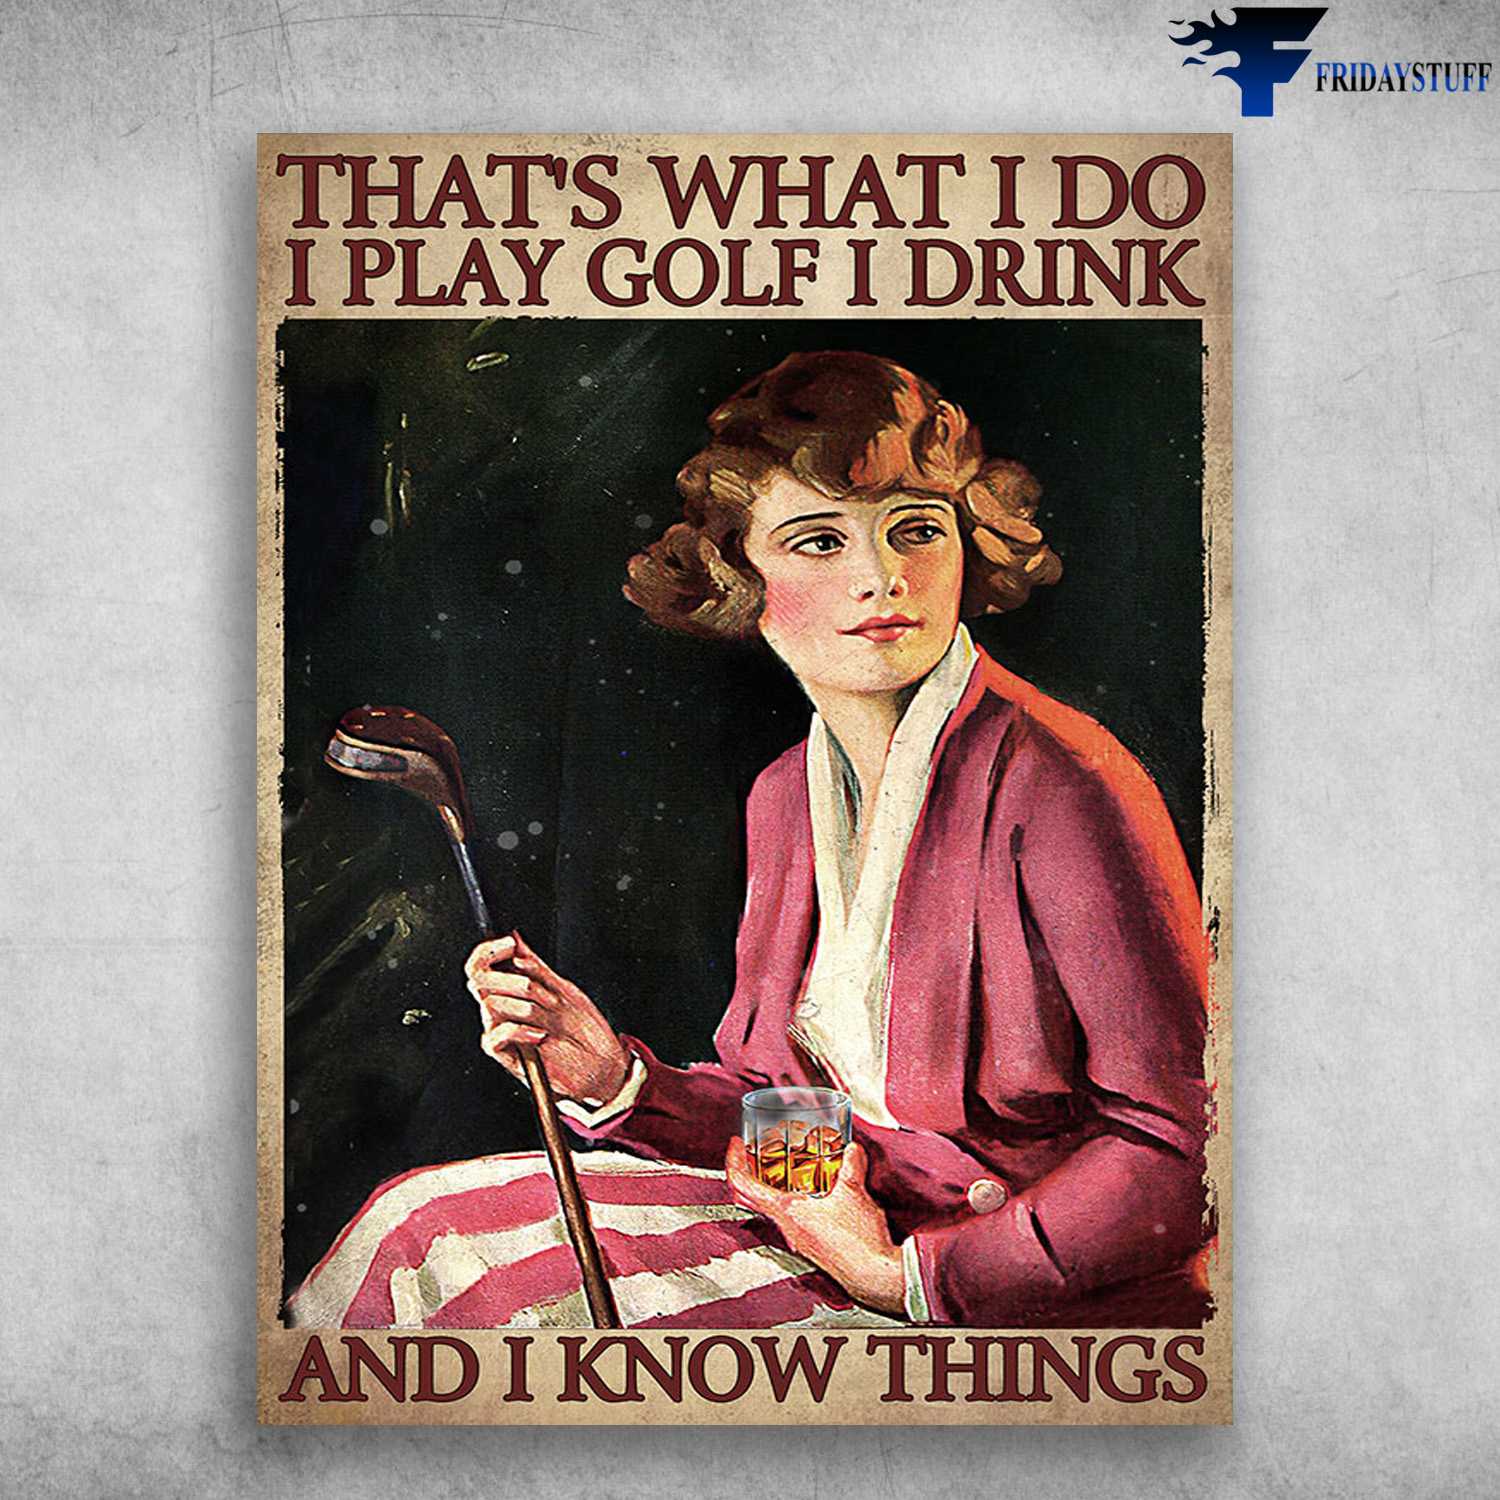 Golf And Wine, Lady Loves Gold - That's What I Do, I Play Golf, I Drink, And I Know Things